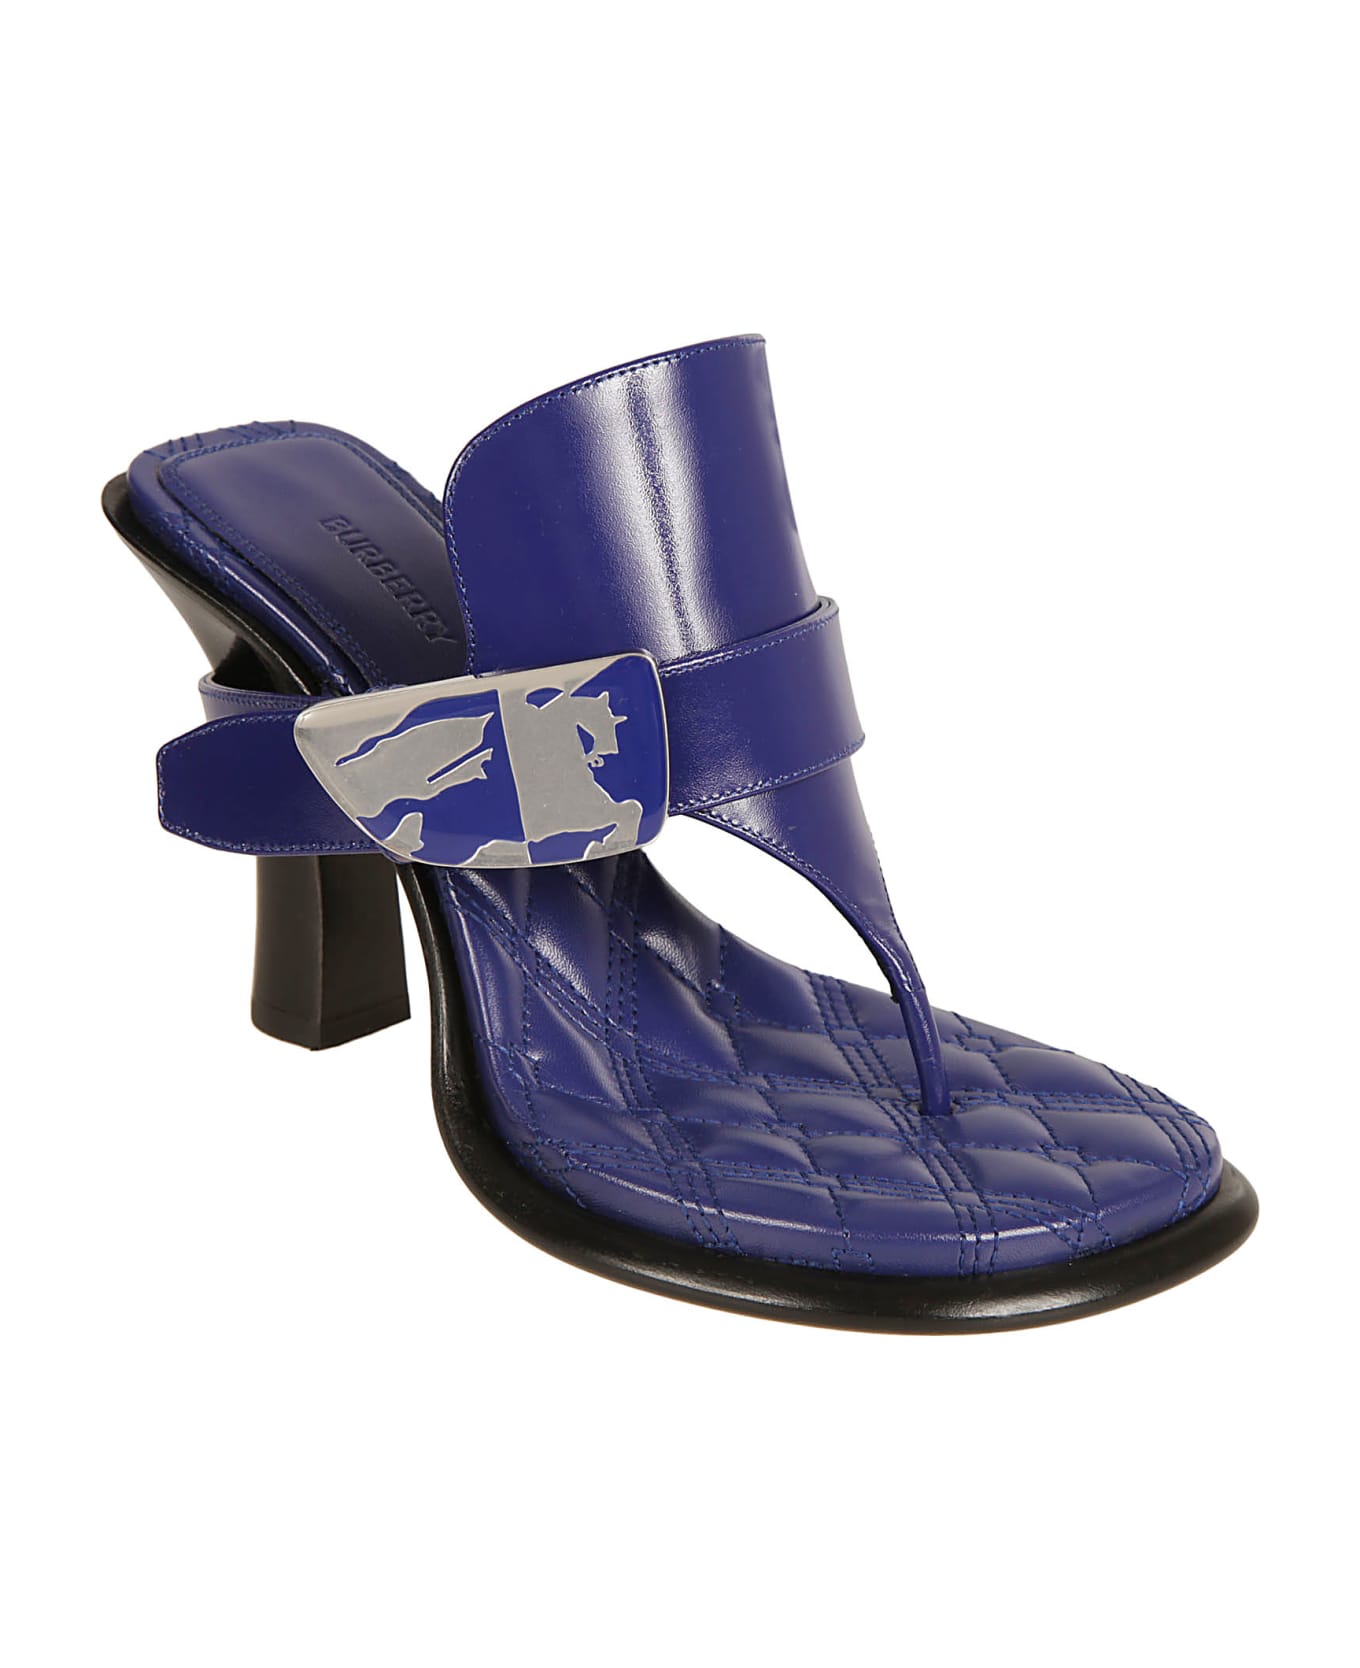 Burberry Bay Sandals - Knight